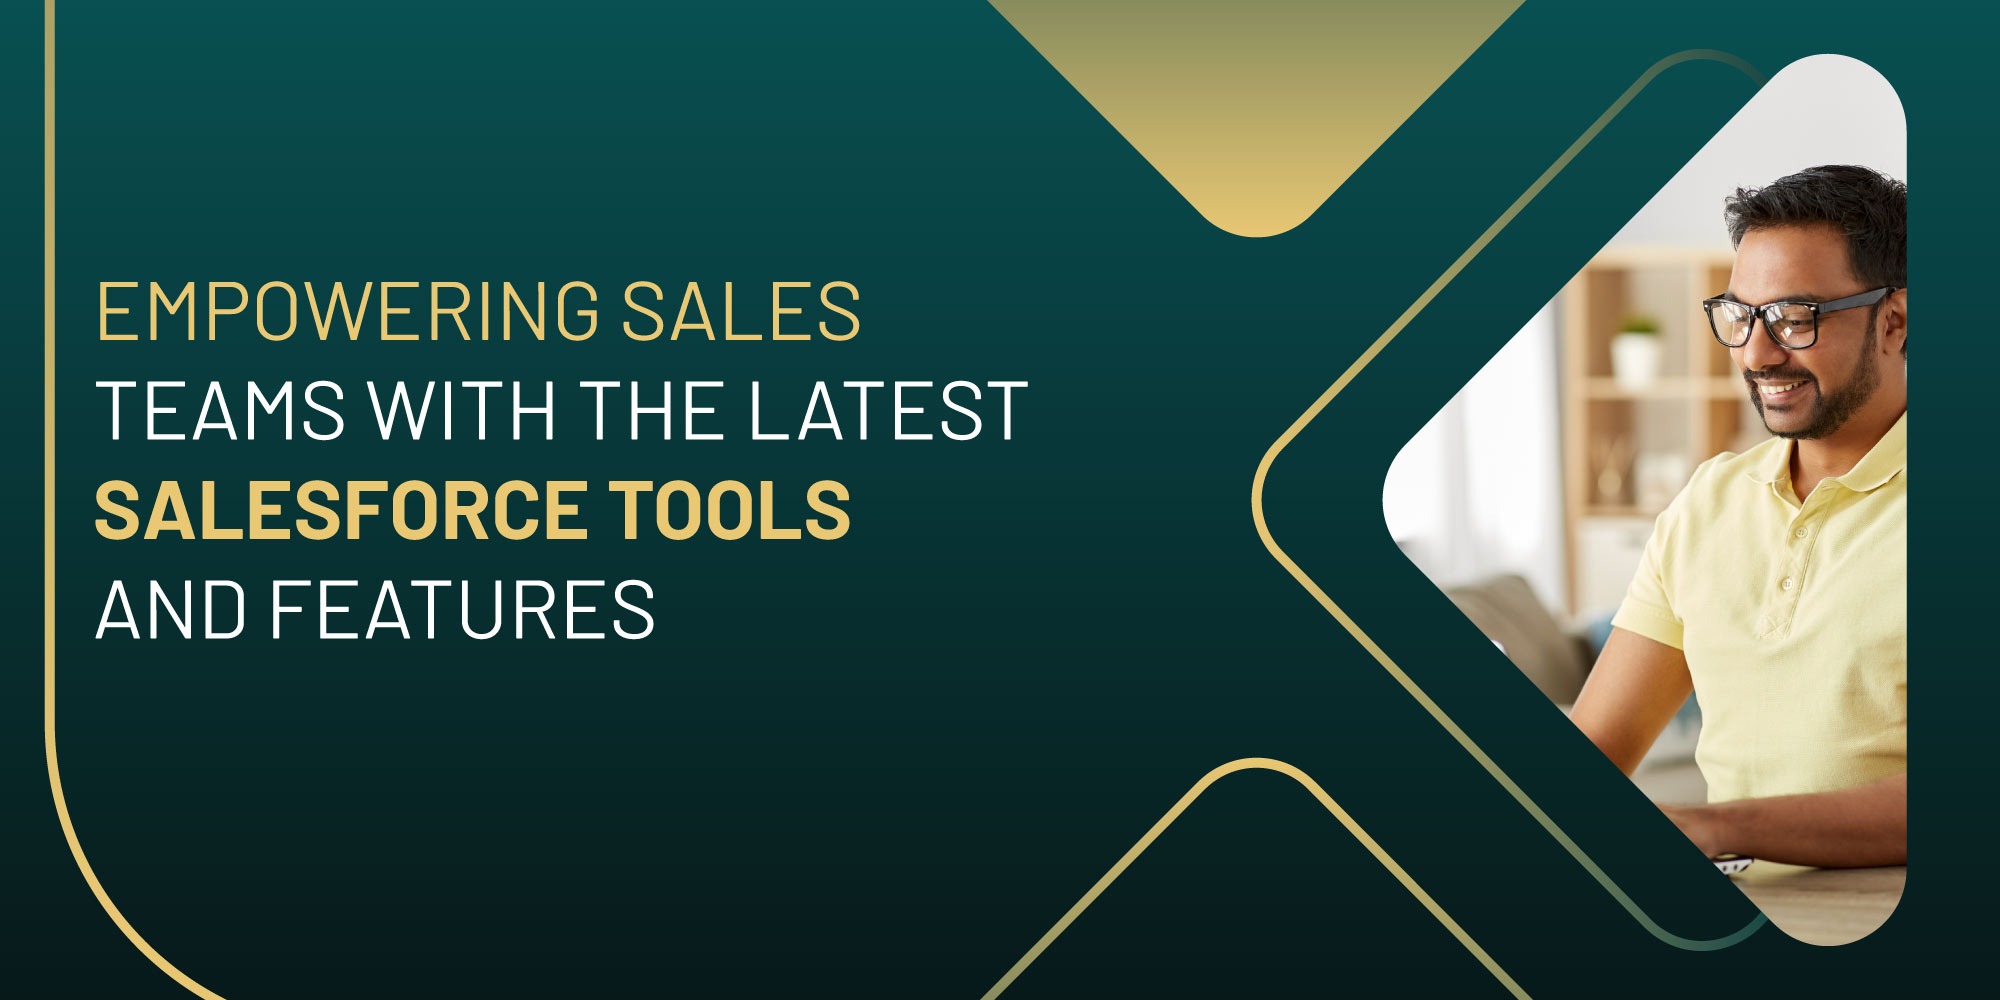 Empowering Sales Teams with the Latest Salesforce Tools and Features